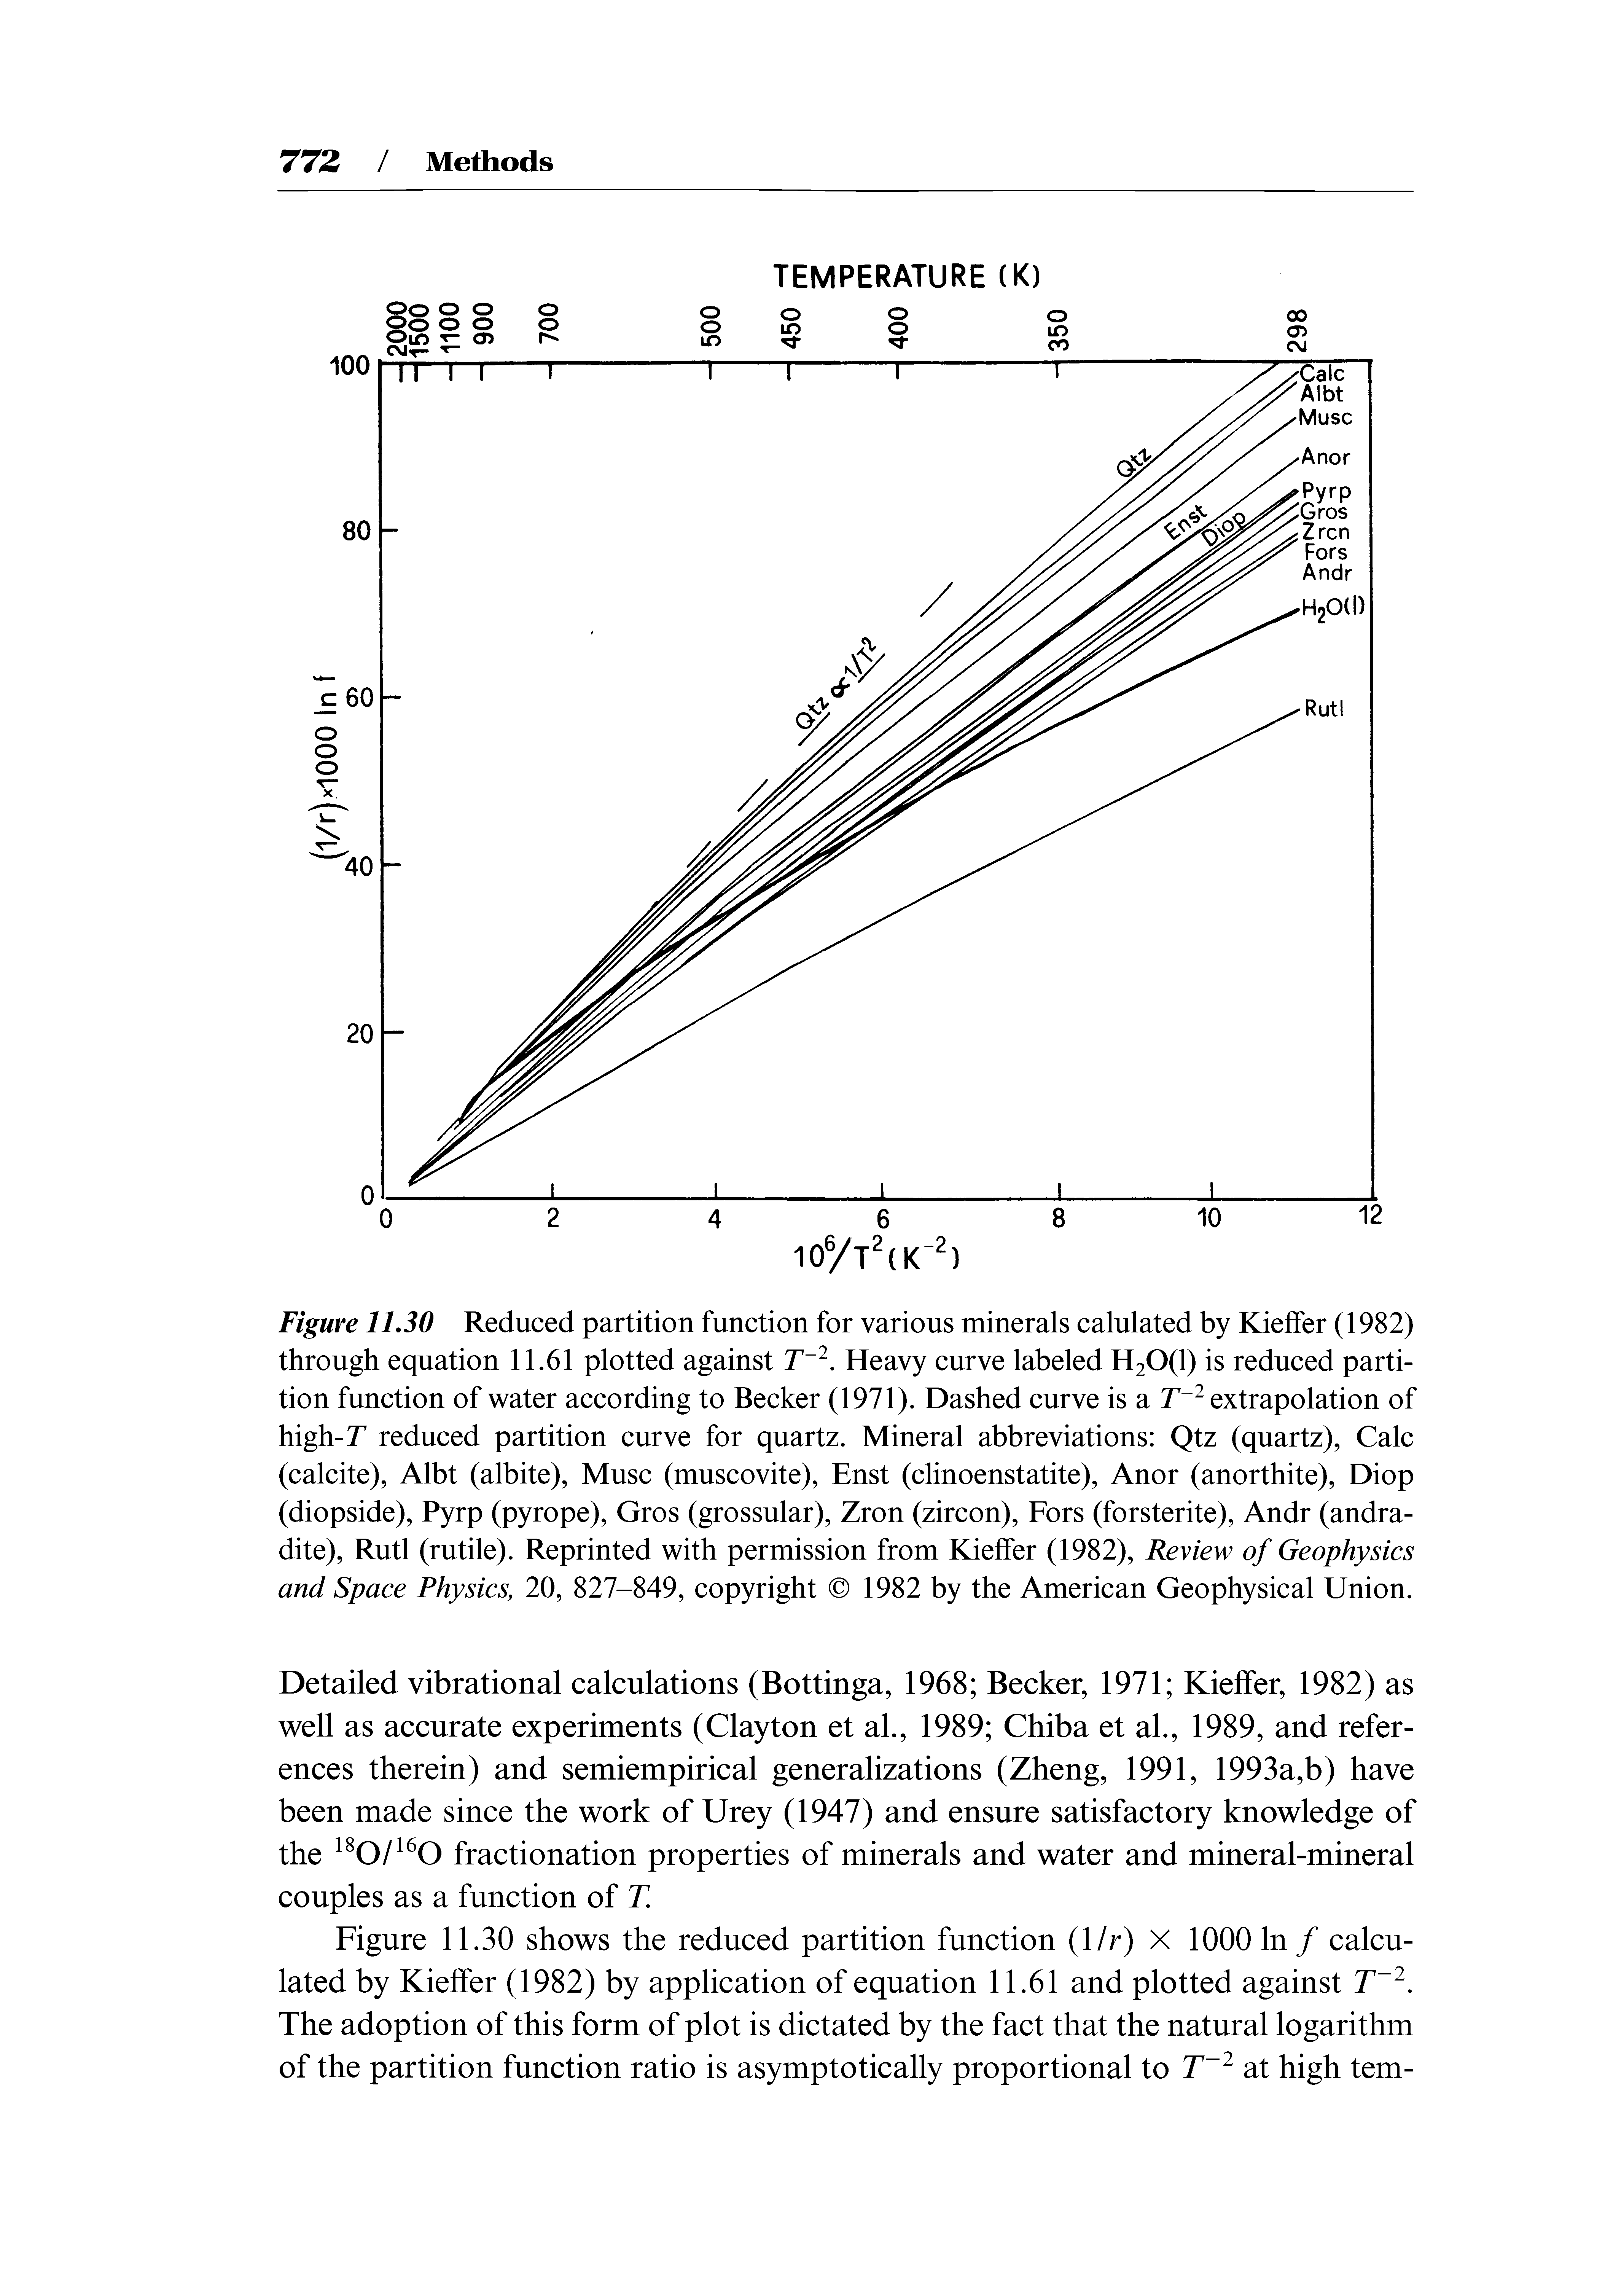 Figure 11.30 Reduced partition function for various minerals calulated by Kieffer (1982) through equation 11.61 plotted against T. Heavy curve labeled H20(l) is reduced partition function of water according to Becker (1971). Dashed curve is a extrapolation of high-r reduced partition curve for quartz. Mineral abbreviations Qtz (quartz), Calc (calcite), Albt (albite), Muse (muscovite), Enst (clinoenstatite), Anor (anorthite). Diop (diopside), Pyrp (pyrope), Gros (grossular), Zron (zircon), Fors (forsterite), Andr (andra-dite), Rutl (rutile). Reprinted with permission from Kieffer (1982), Review of Geophysics and Space Physics, 20, 827-849, copyright 1982 by the American Geophysical Union.